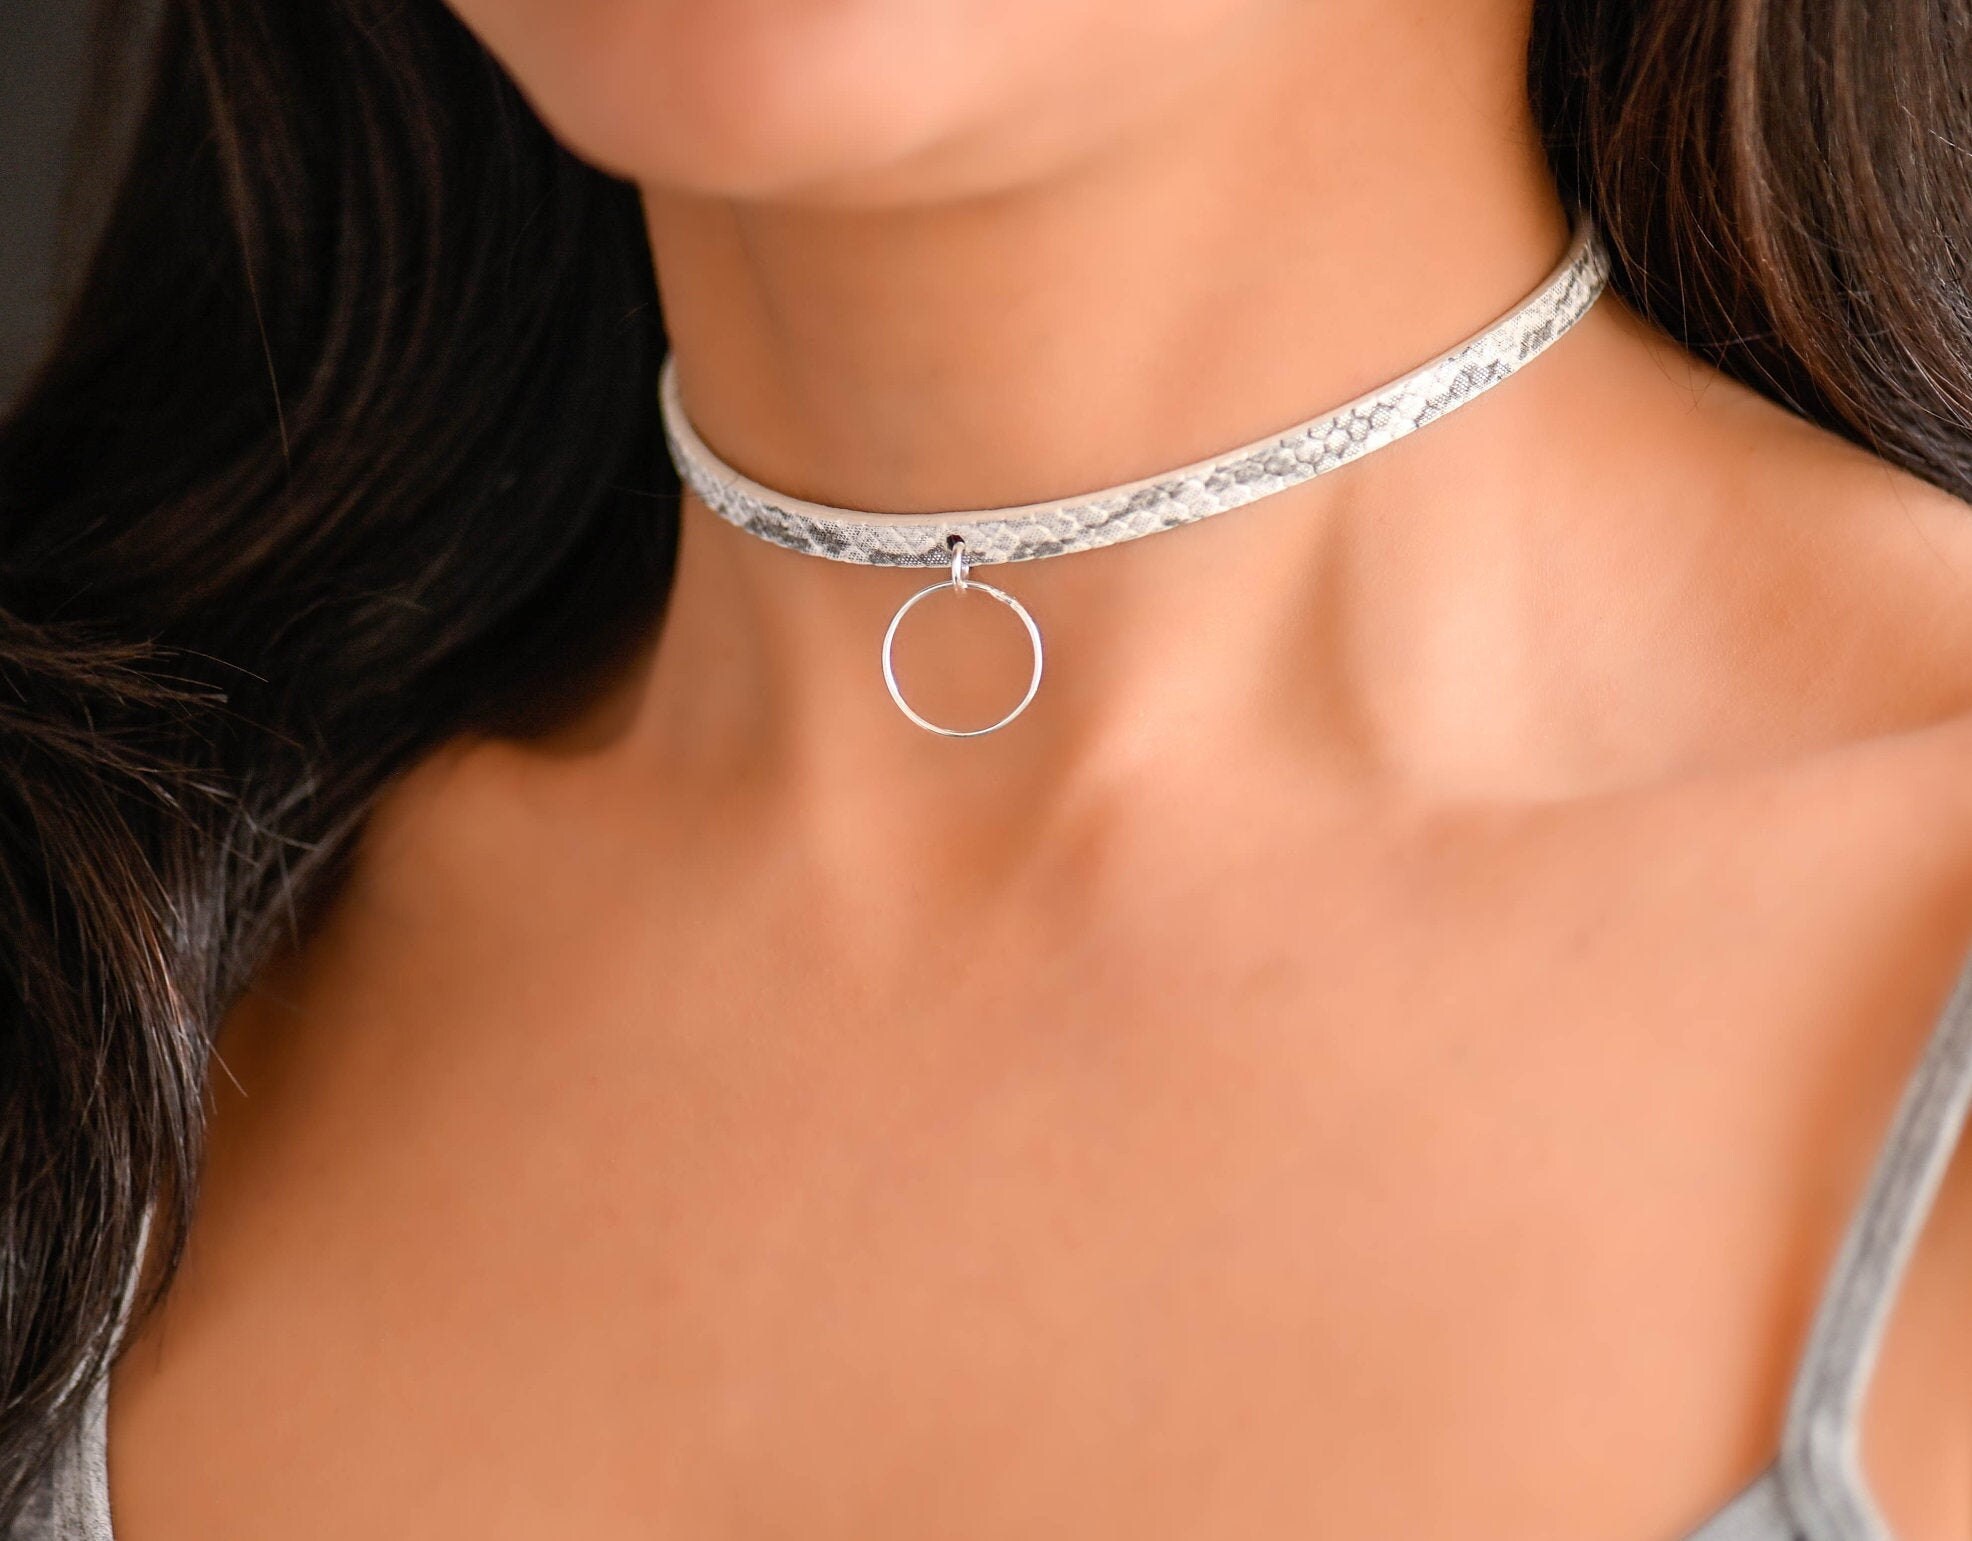 This BDSM day collar is discreet and has a symbolic o ring on pu leather th...